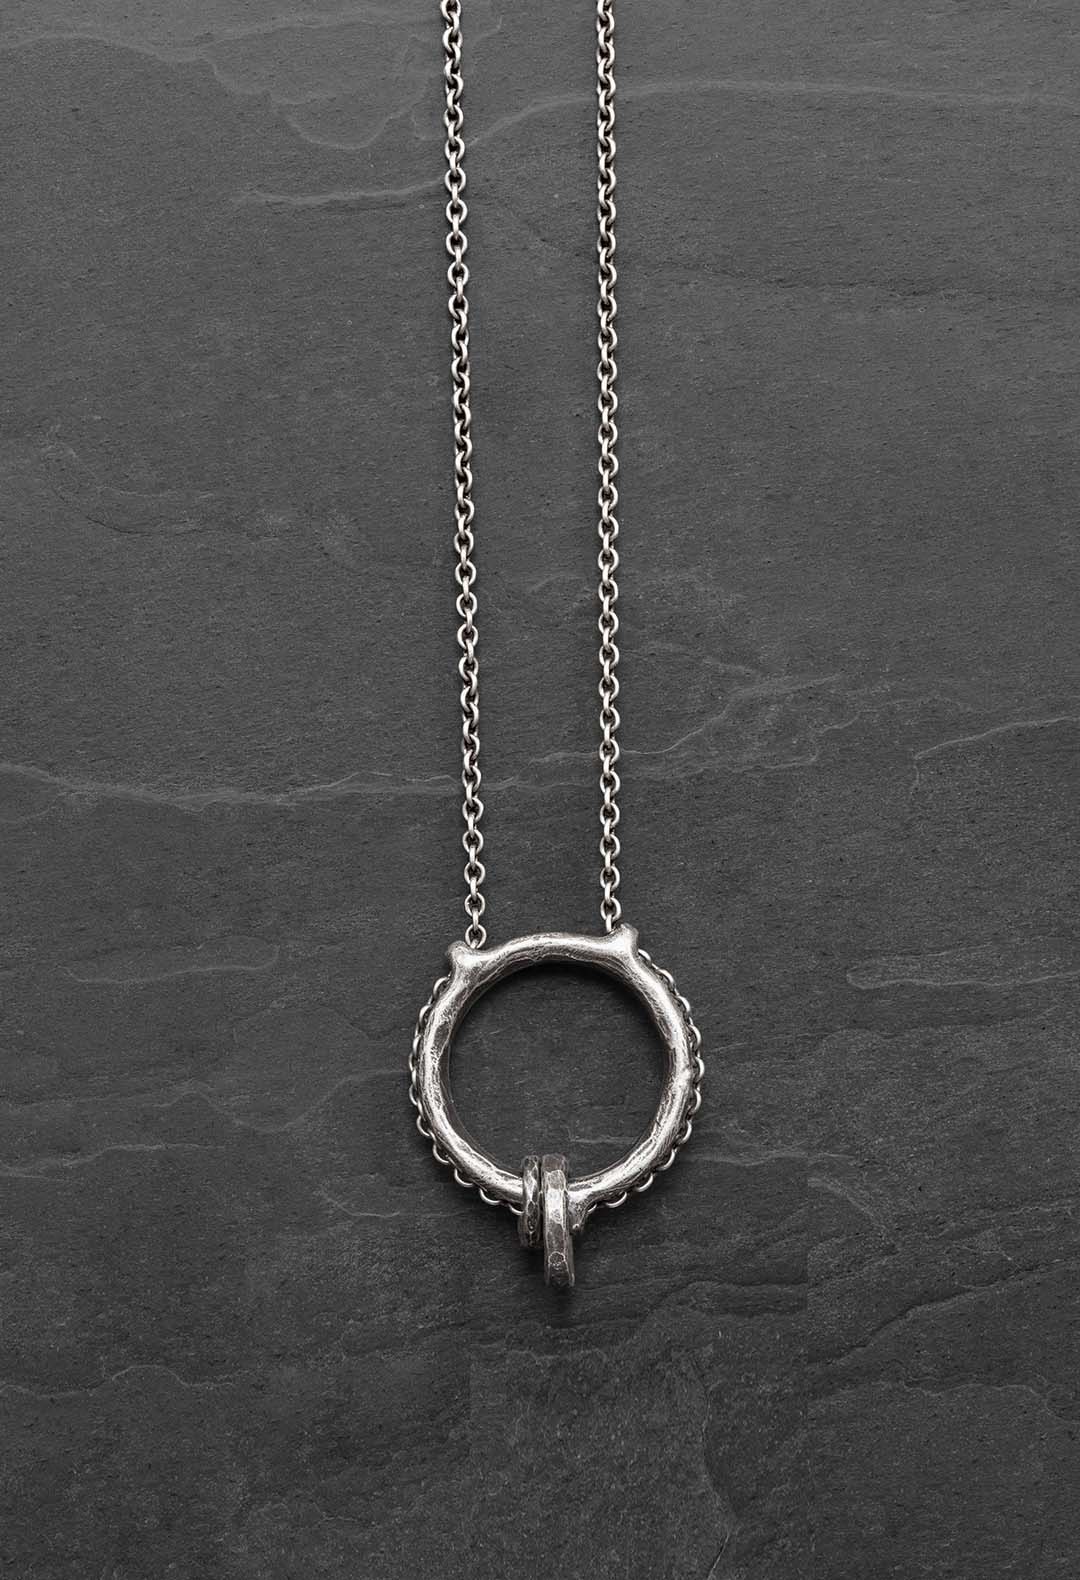 Chain loop necklace